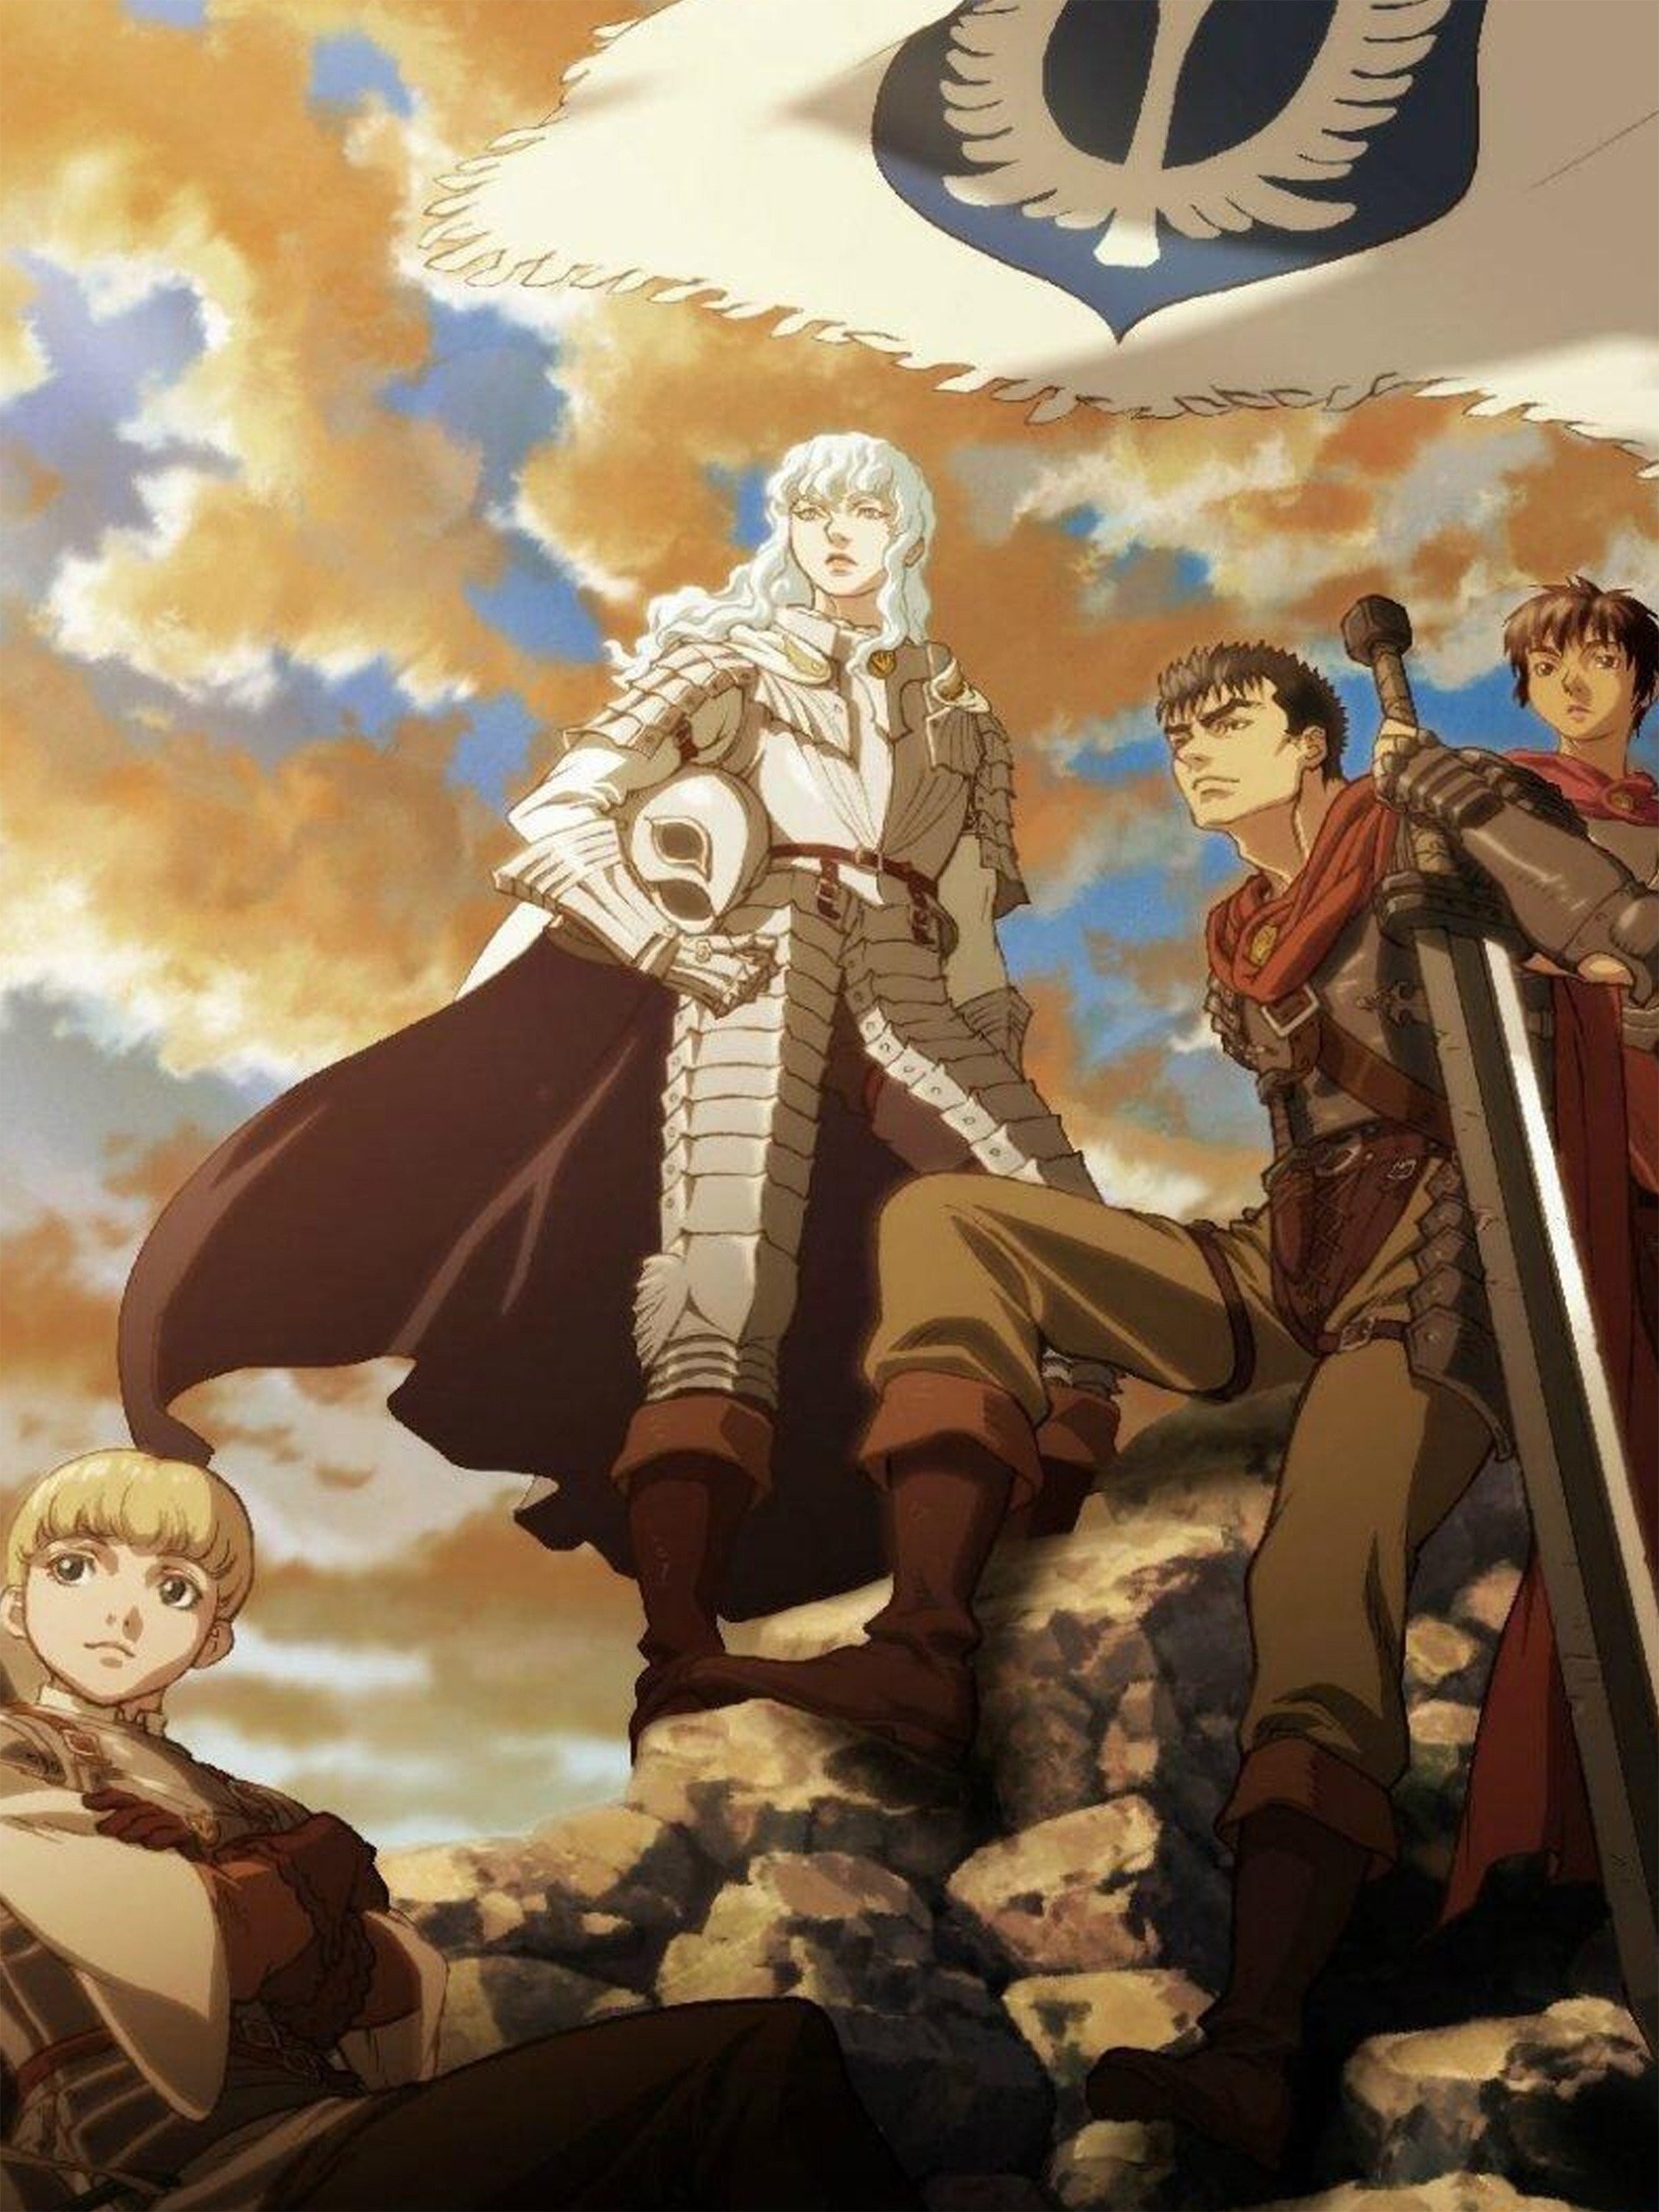 Berserk: The Golden Age Arc III - The Advent (2013) directed by Toshiyuki  Kubooka • Reviews, film + cast • Letterboxd